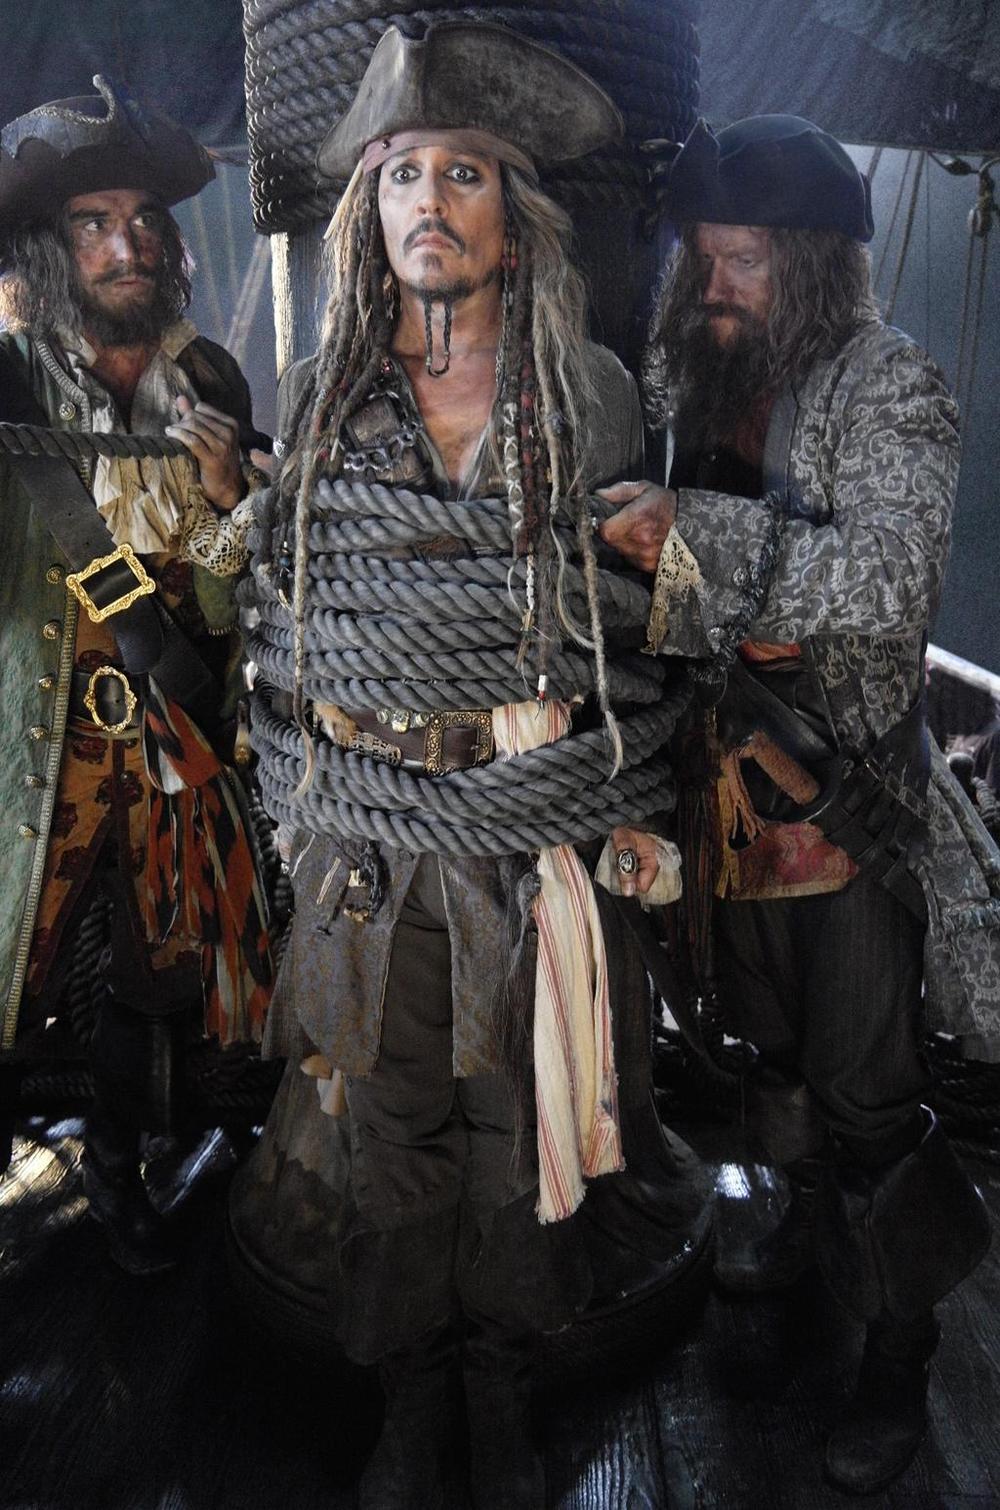 NEWS for Pirates 5 "Dead Men Tell No Tales" [WARNING] may contain spoilers - Page 10 First-photo-of-johnny-deep-as-jack-sparrow-in-pirates-of-the-caribbean-5